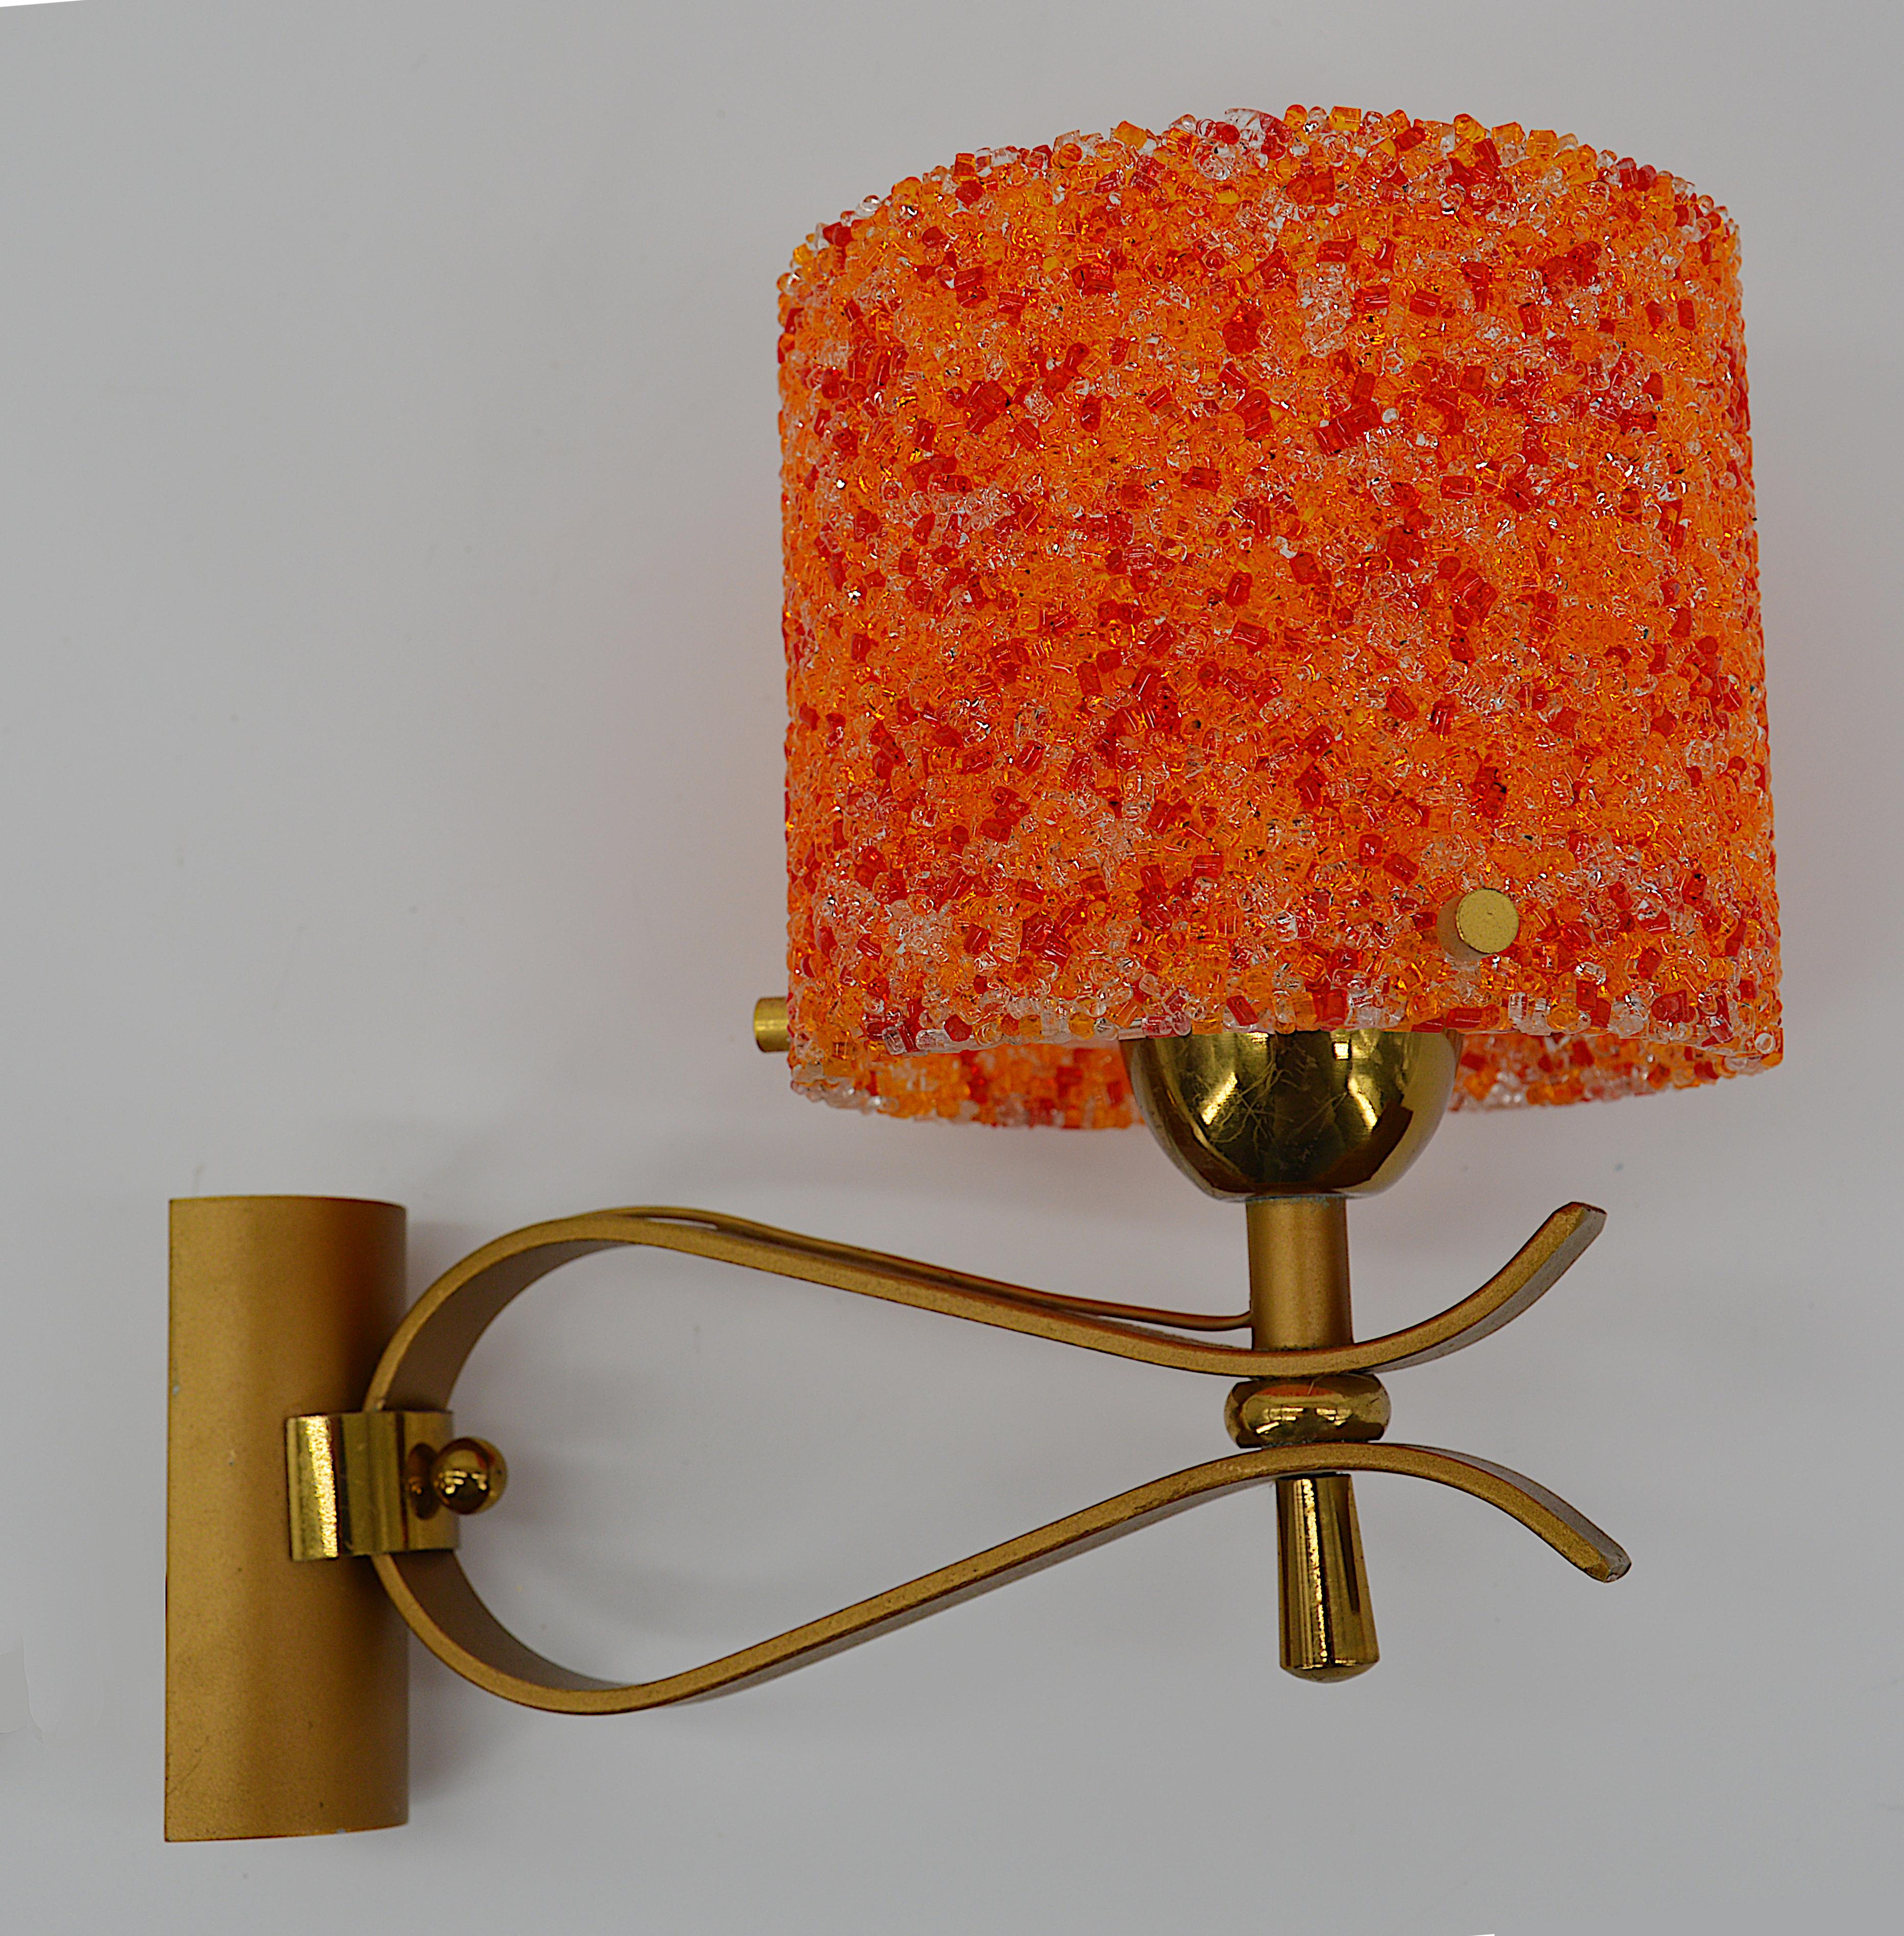 French midcentury Pop Art pair of wall sconces, France, late 1960s. Perspex and brass. Measures: Height 7.5